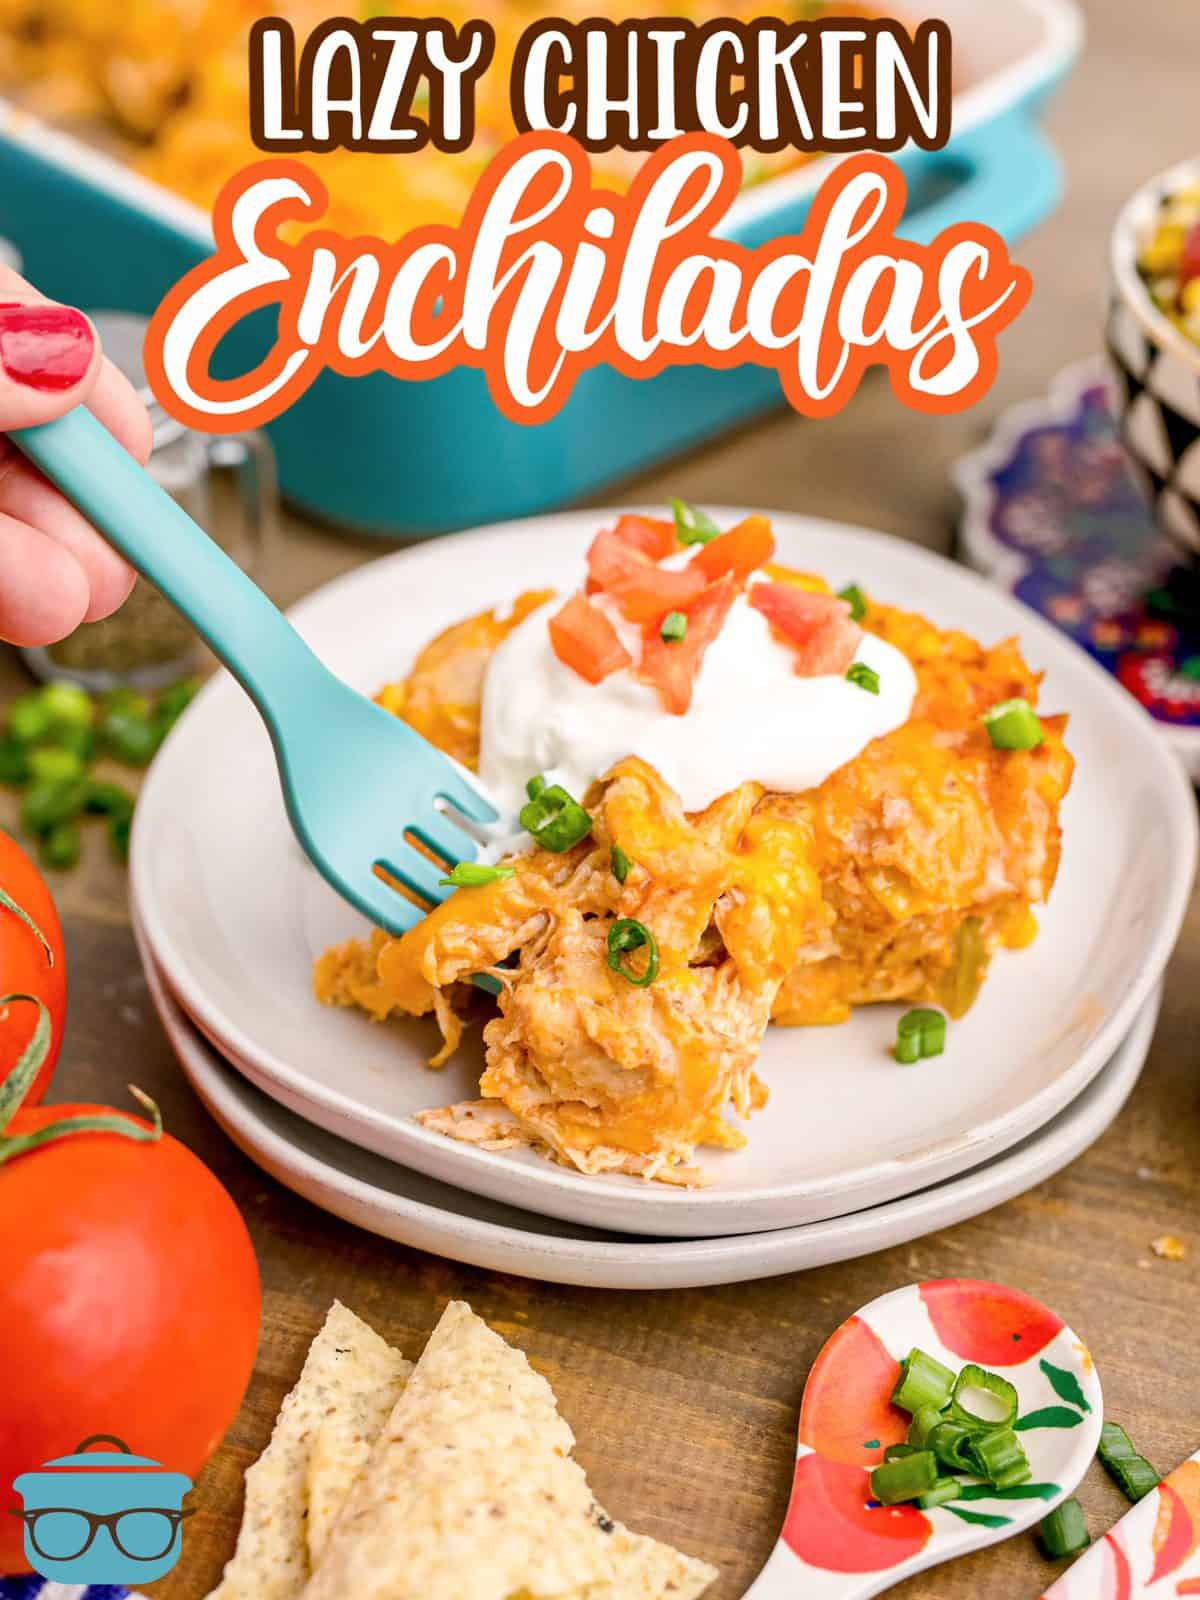 Lazy Chicken Enchiladas on plate with toppings and fork going into food.